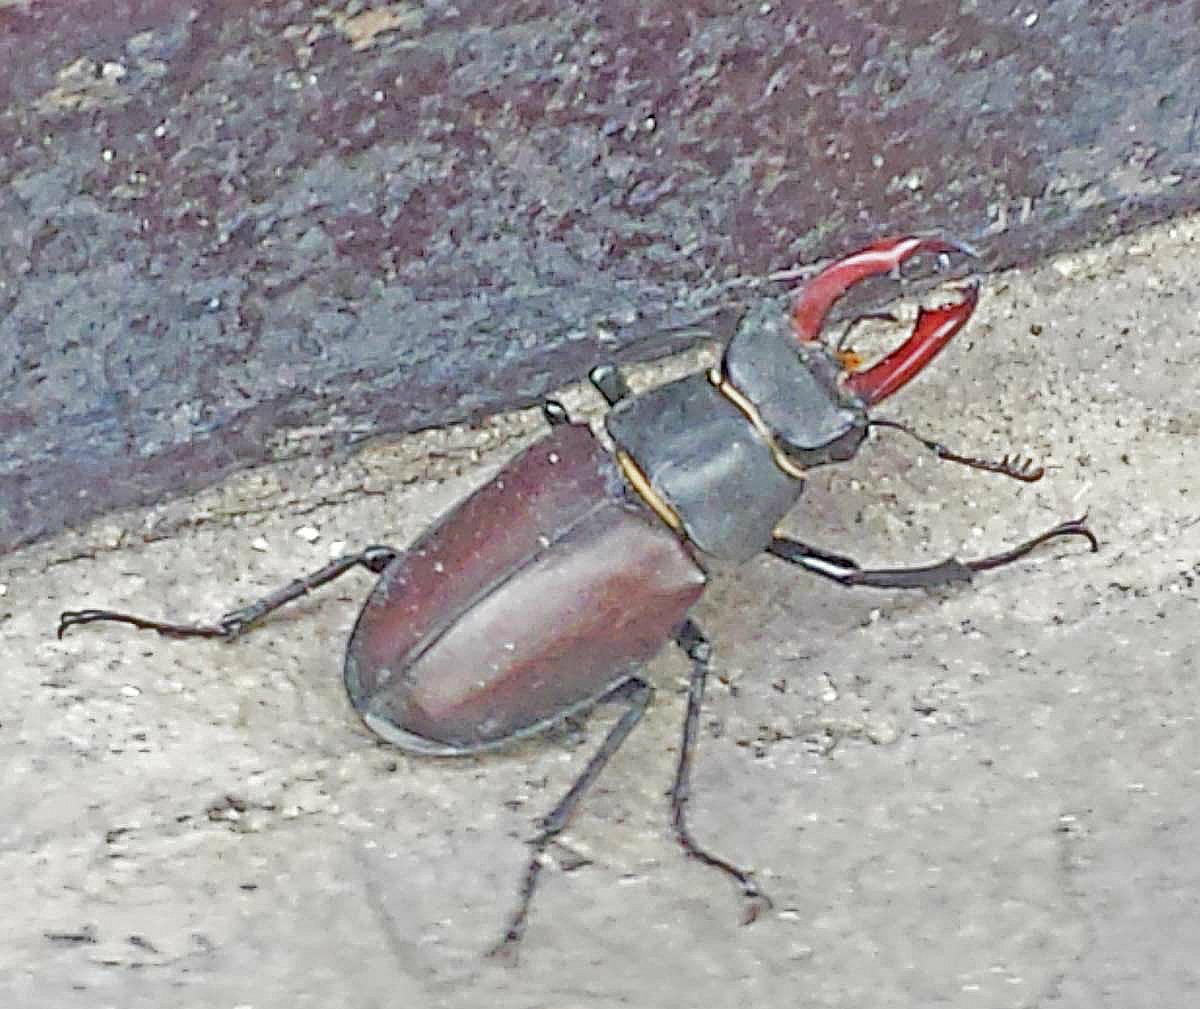 Stag beetle - simple ways to protect the stag beetle and it's amazing transformation story #nature #bugs #lifecycle #naturelover #science #biology